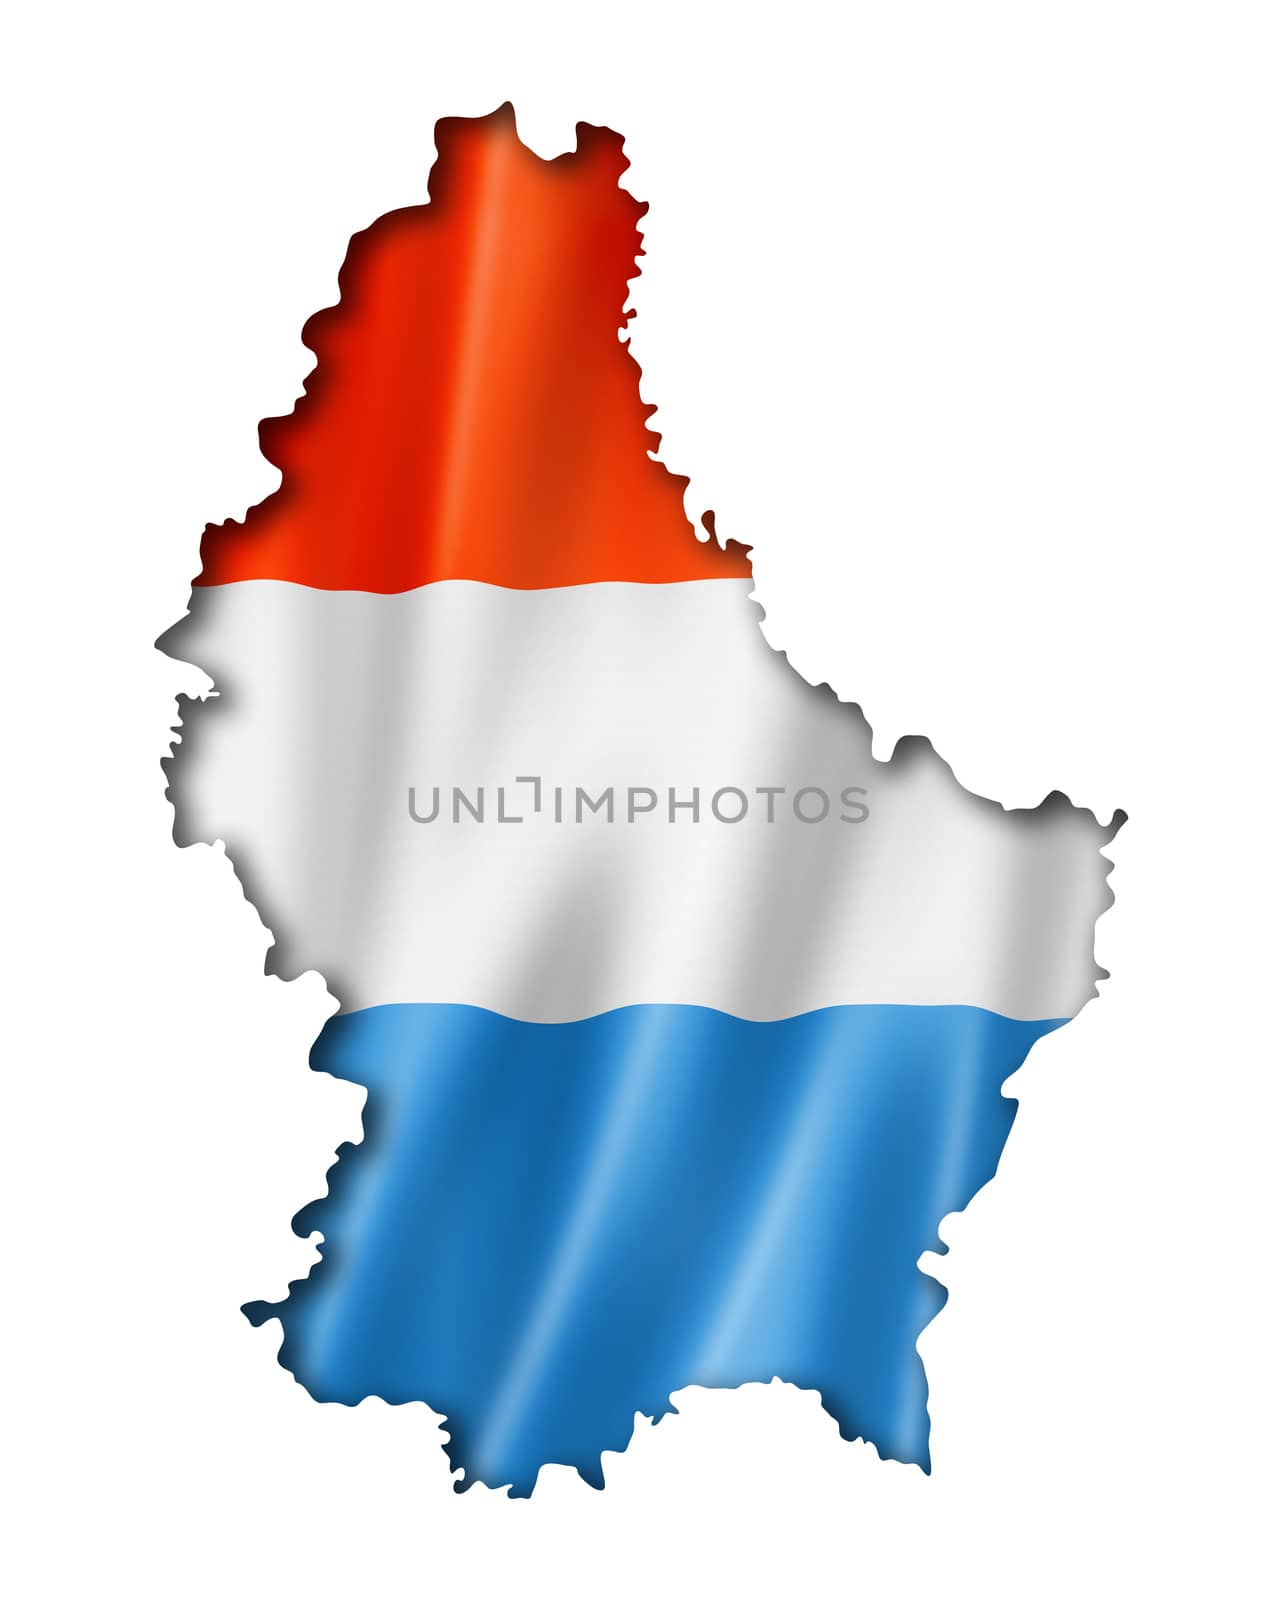 Luxembourg flag map, three dimensional render, isolated on white